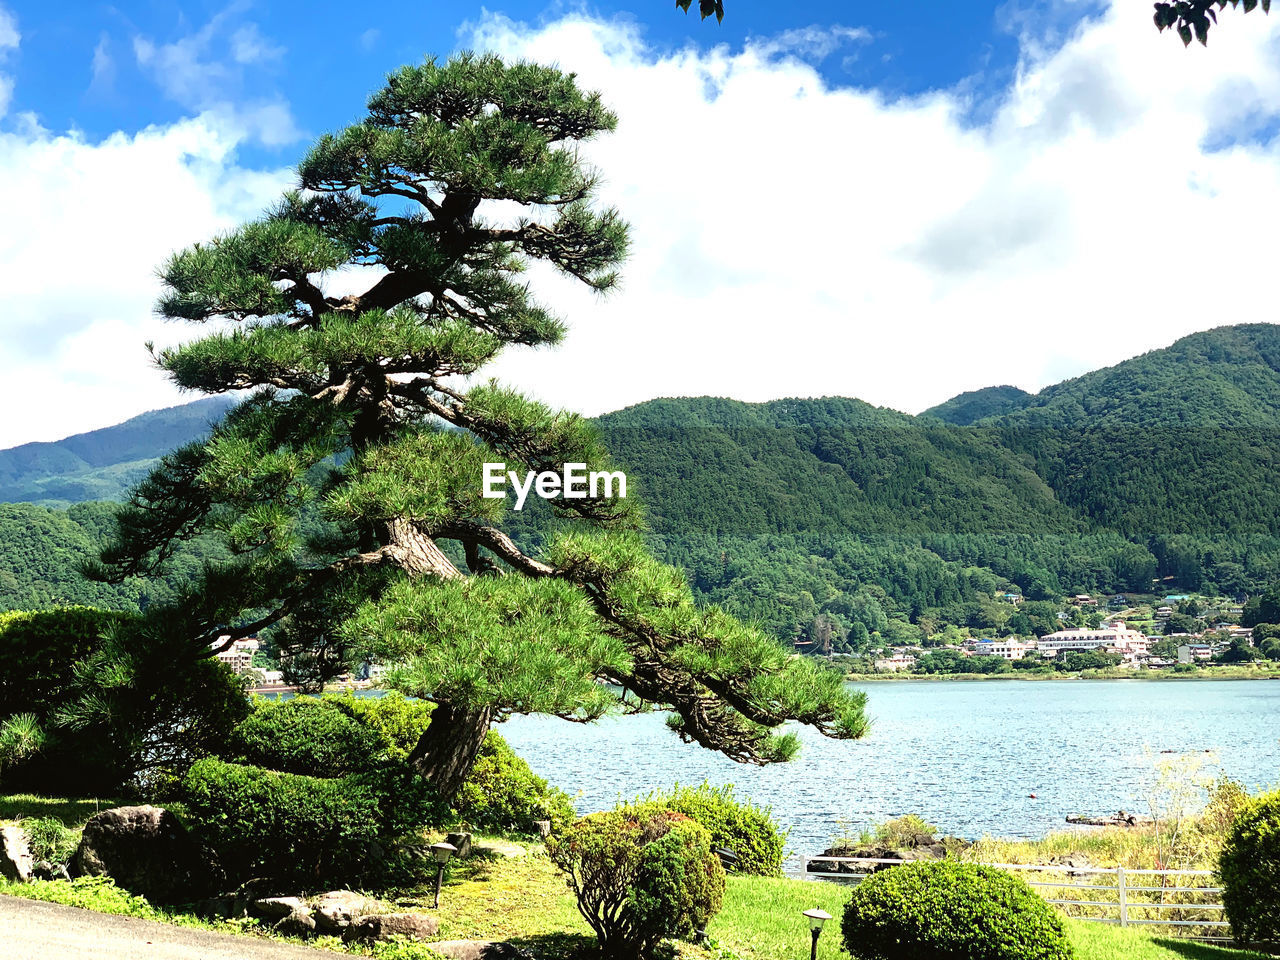 plant, tree, beauty in nature, water, sky, nature, scenics - nature, mountain, tranquility, green, tranquil scene, cloud, day, lake, no people, growth, land, non-urban scene, environment, outdoors, sunlight, landscape, idyllic, mountain range, travel destinations, coniferous tree, forest